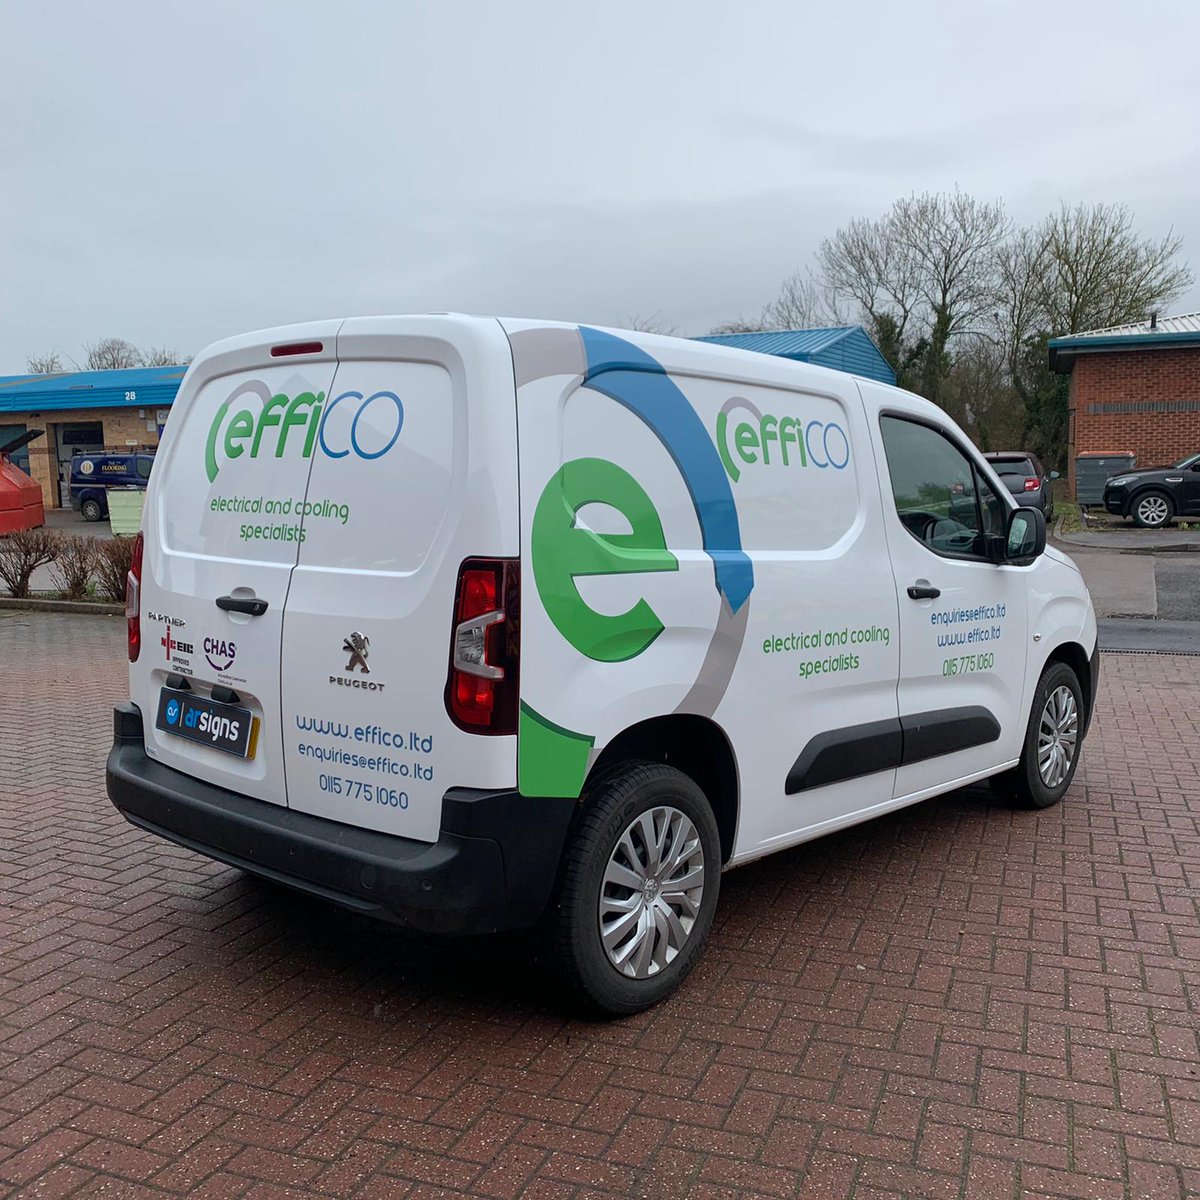 Keep an eye out for us this week. Domestic & commercial teams are busy all over Nottinghamshire this week. Might even be down your street!

0115 775 1060
effico.ltd 

#efficoltd #domesticelectricians #Nottingham #Nottinghamshire #evchargers #commercialelectricians